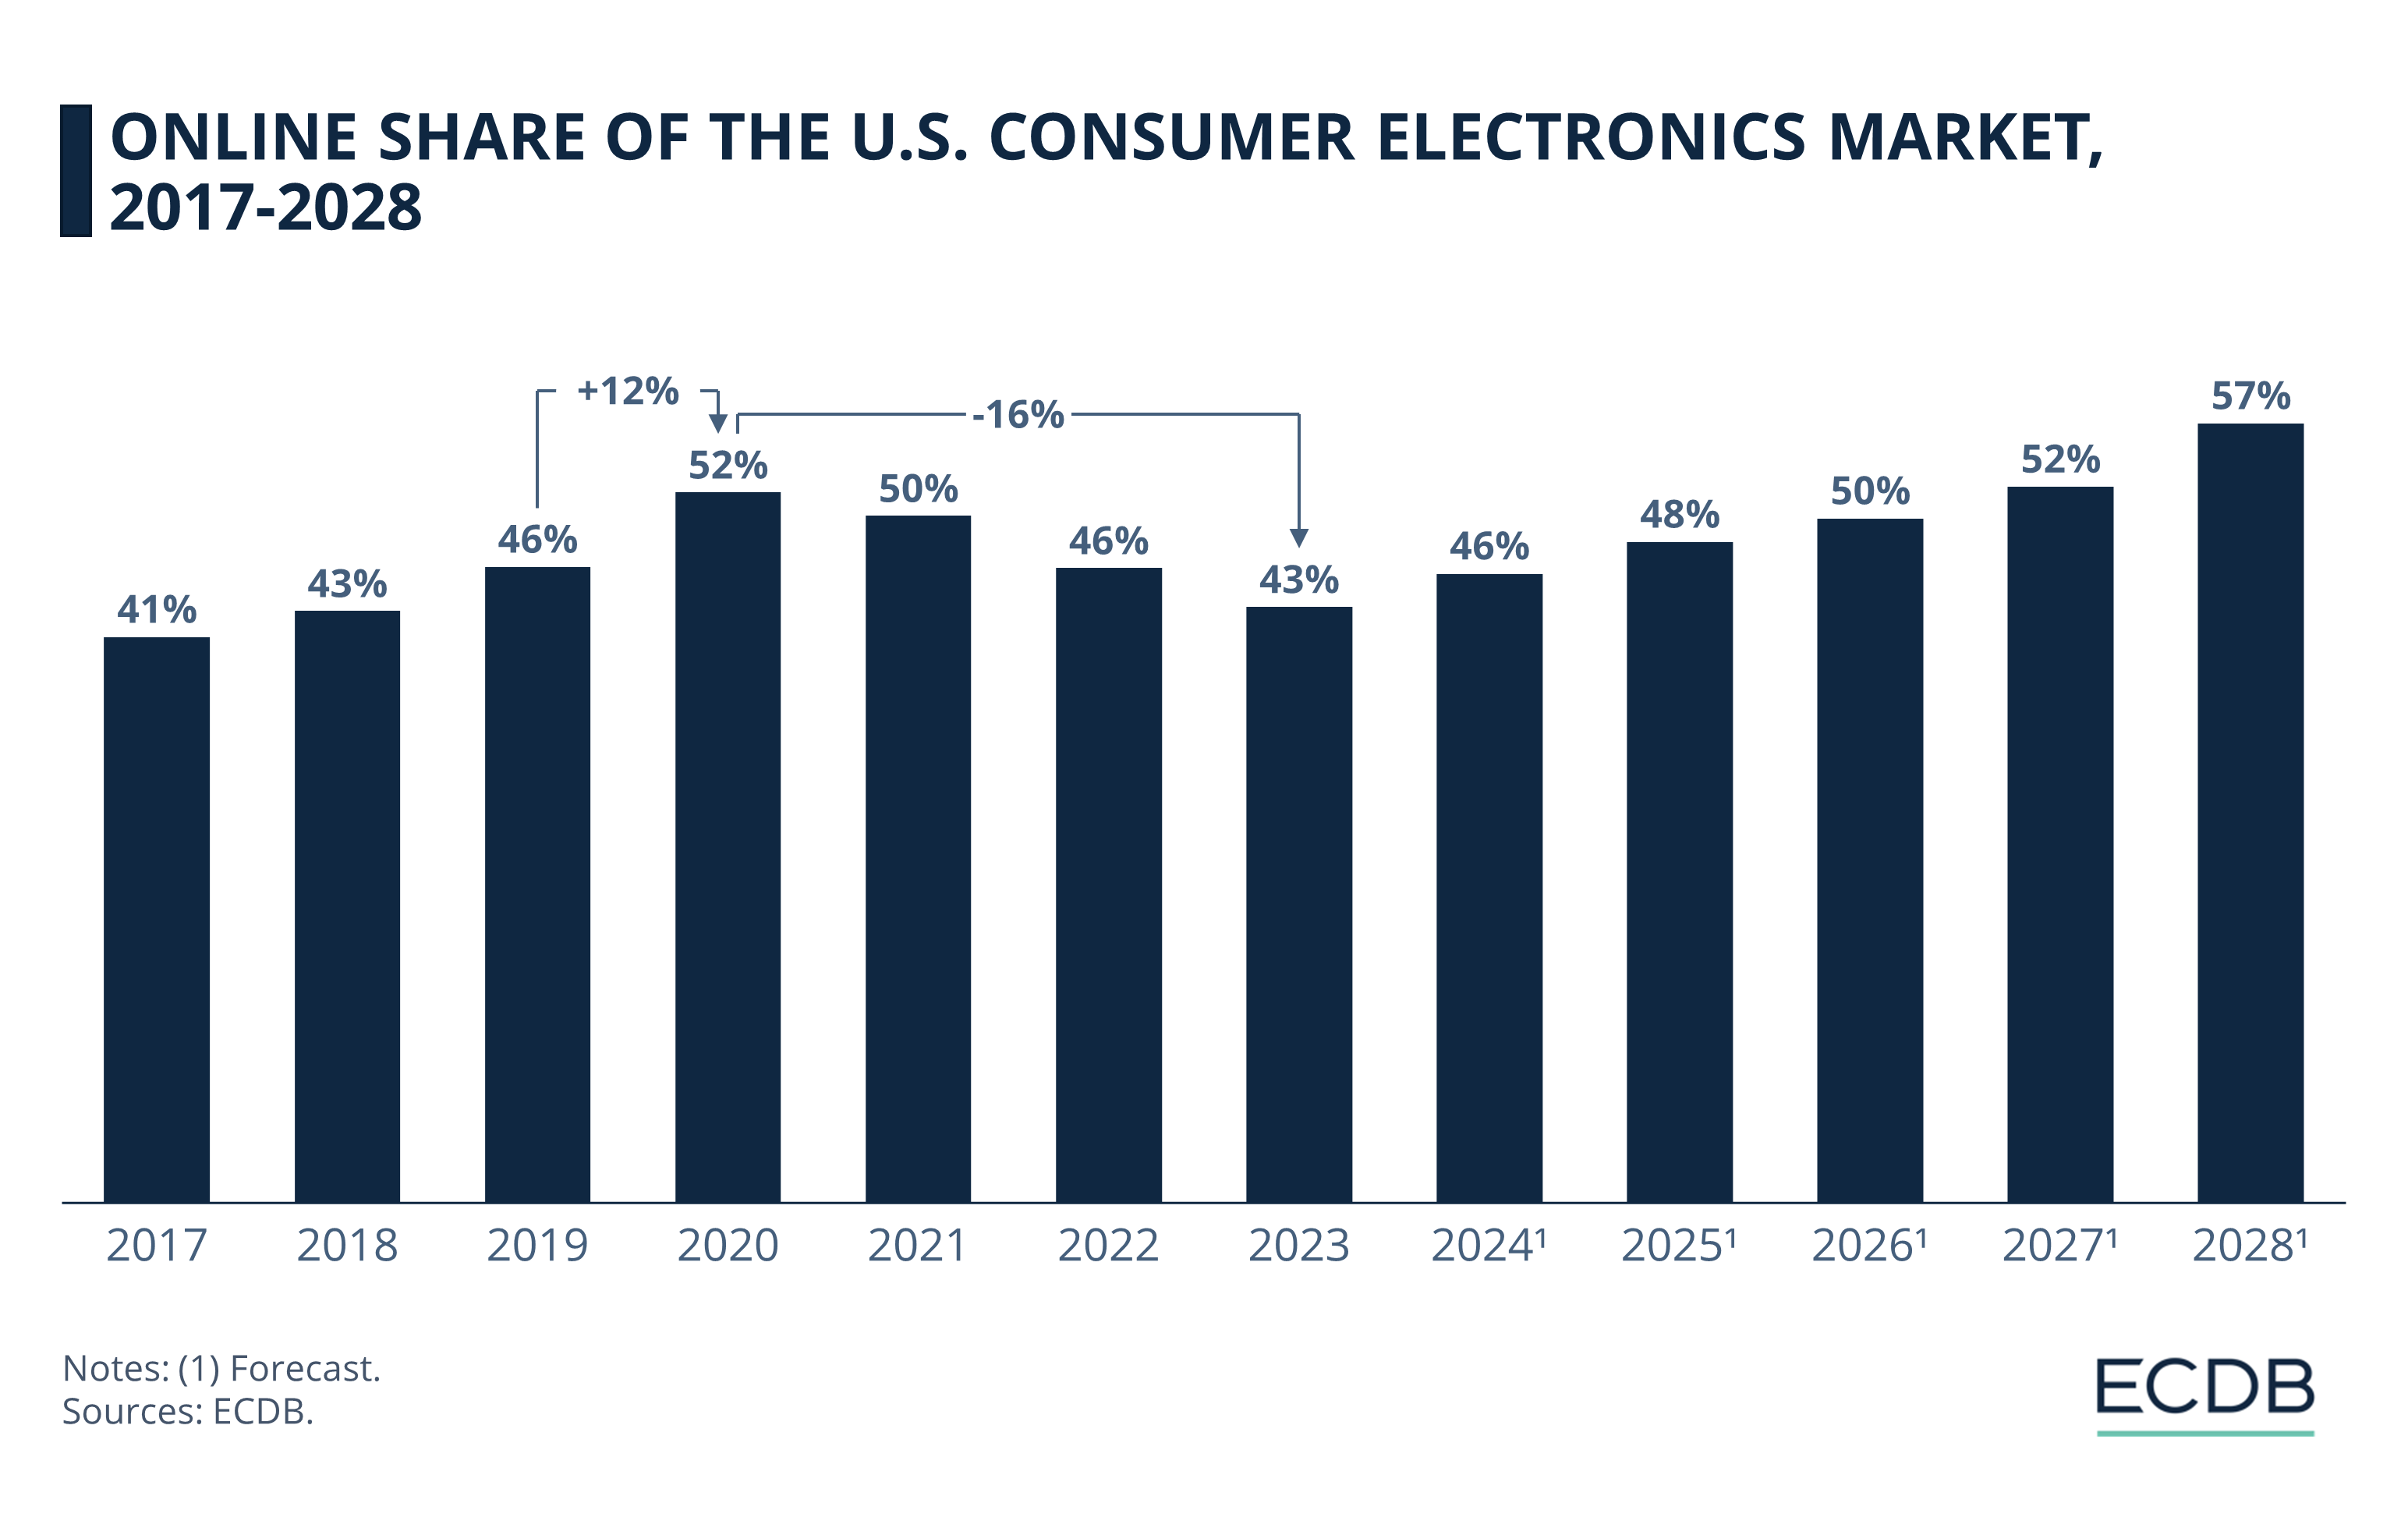 Online Share of the U.S. Consumer Electronics Market, 2017-2028